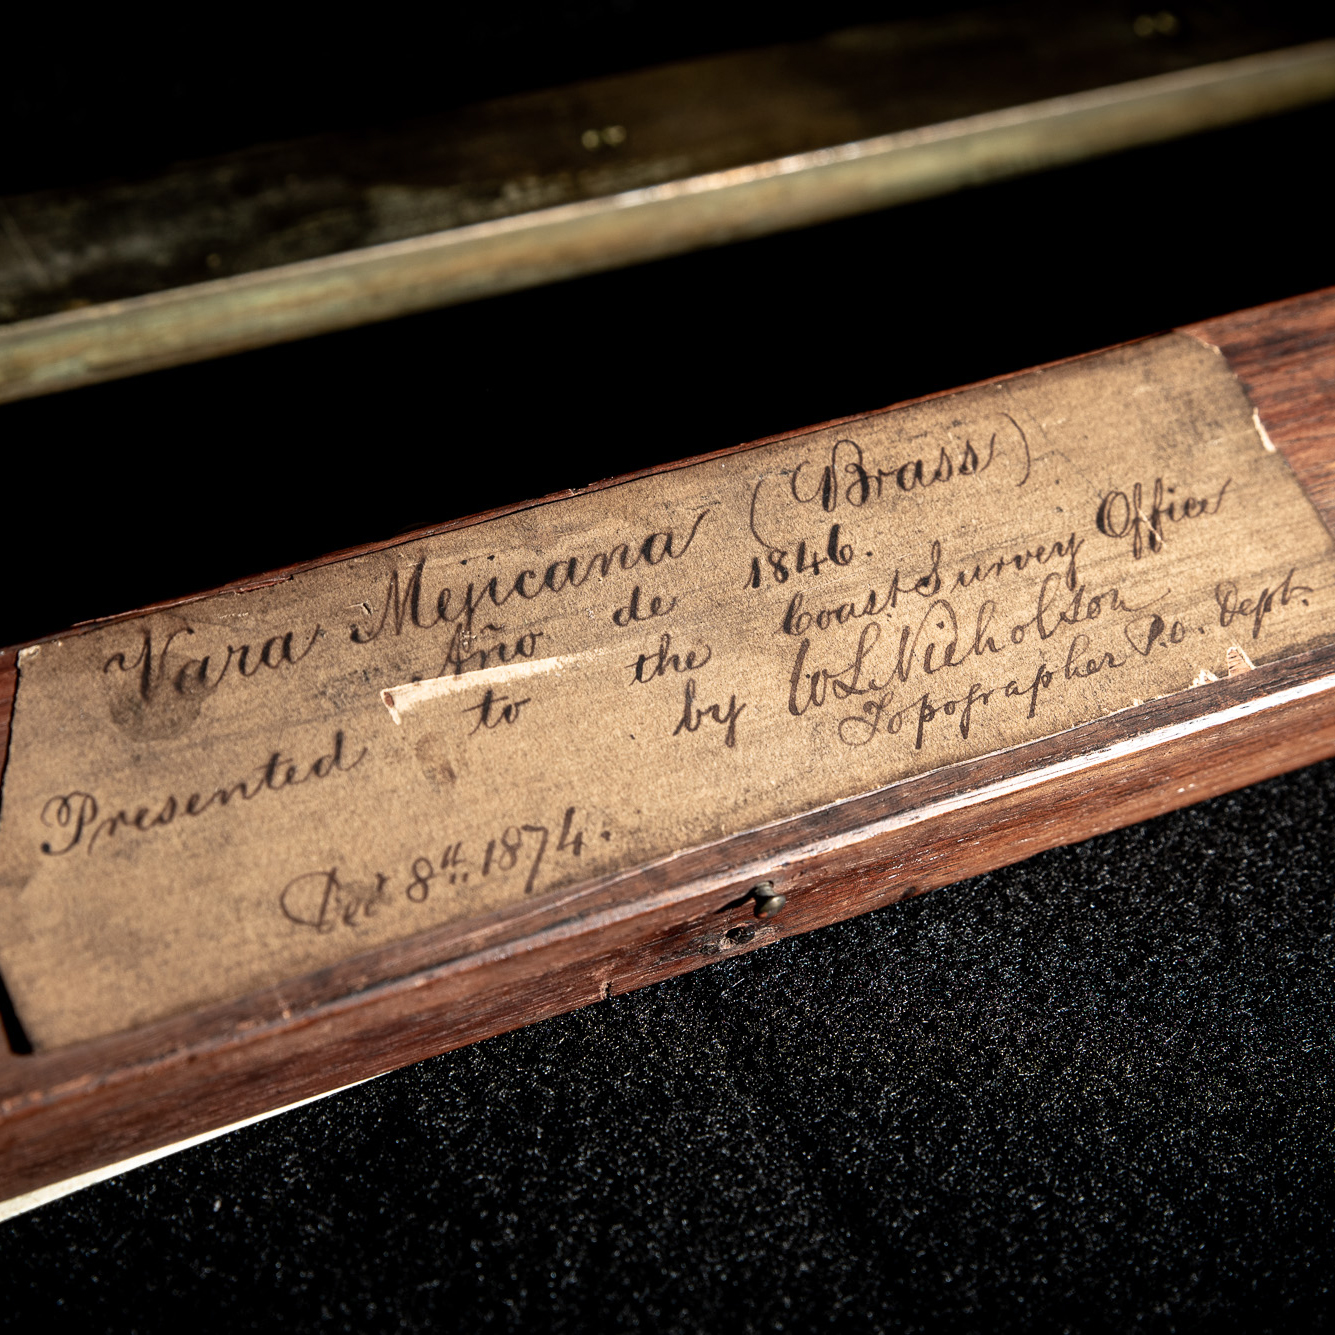 Label on the box holding one of the varas. It reads "Vara Mejicana (Brass), Ano de 1846, Presented to the the Coast Survey Office by WL Nicholson, Topographer P.O. Dept, Dec 8th, 1874